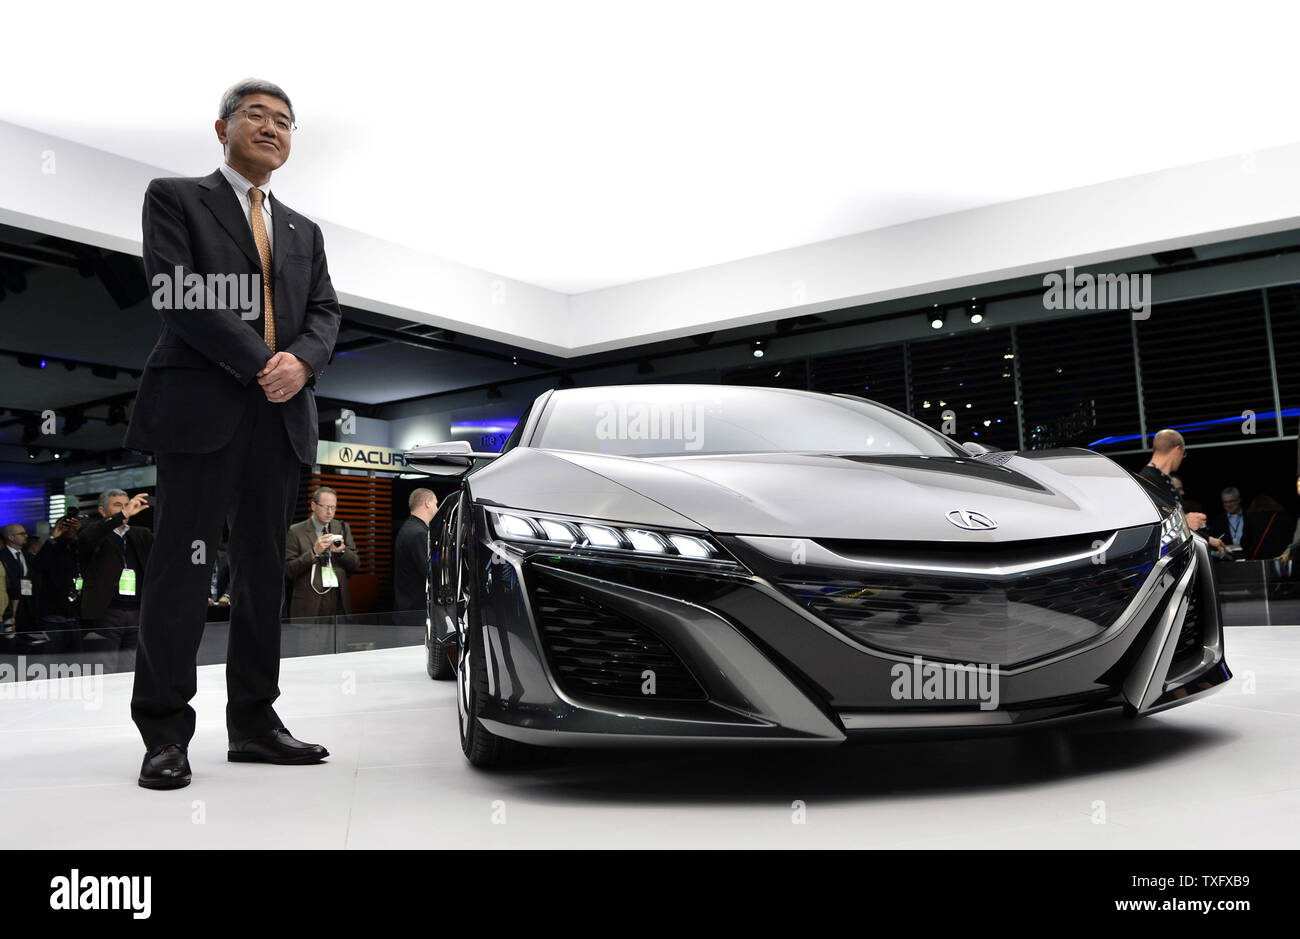 Kaichi Fukuo, Managing Officer of Honda Motor Company, stands with the Acura NSX concept at the 2013 North American International Auto Show in Detroit on January 15, 2013.    UPI/Brian Kersey Stock Photo